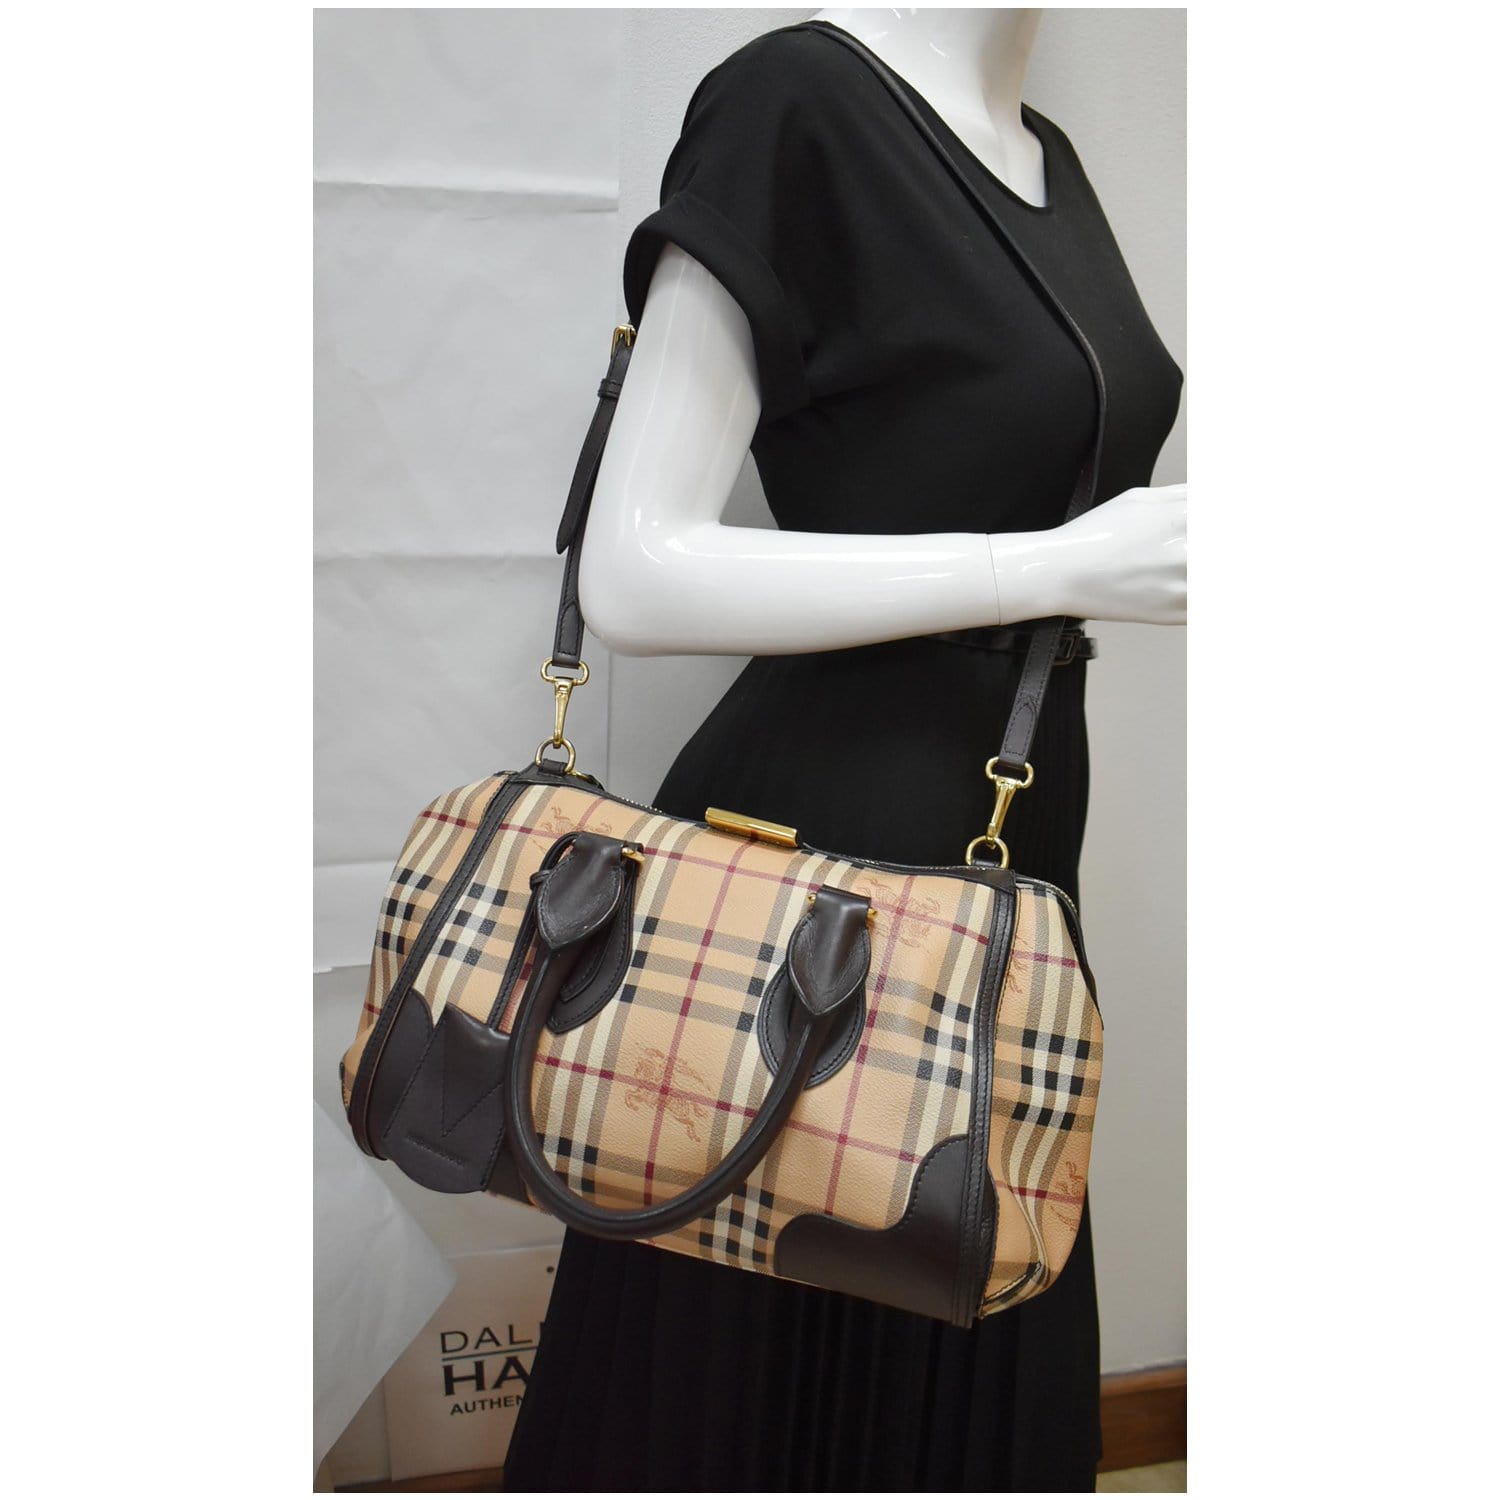 BURBERRY Haymarket Check Small Chester Bowling Bag Chocolate